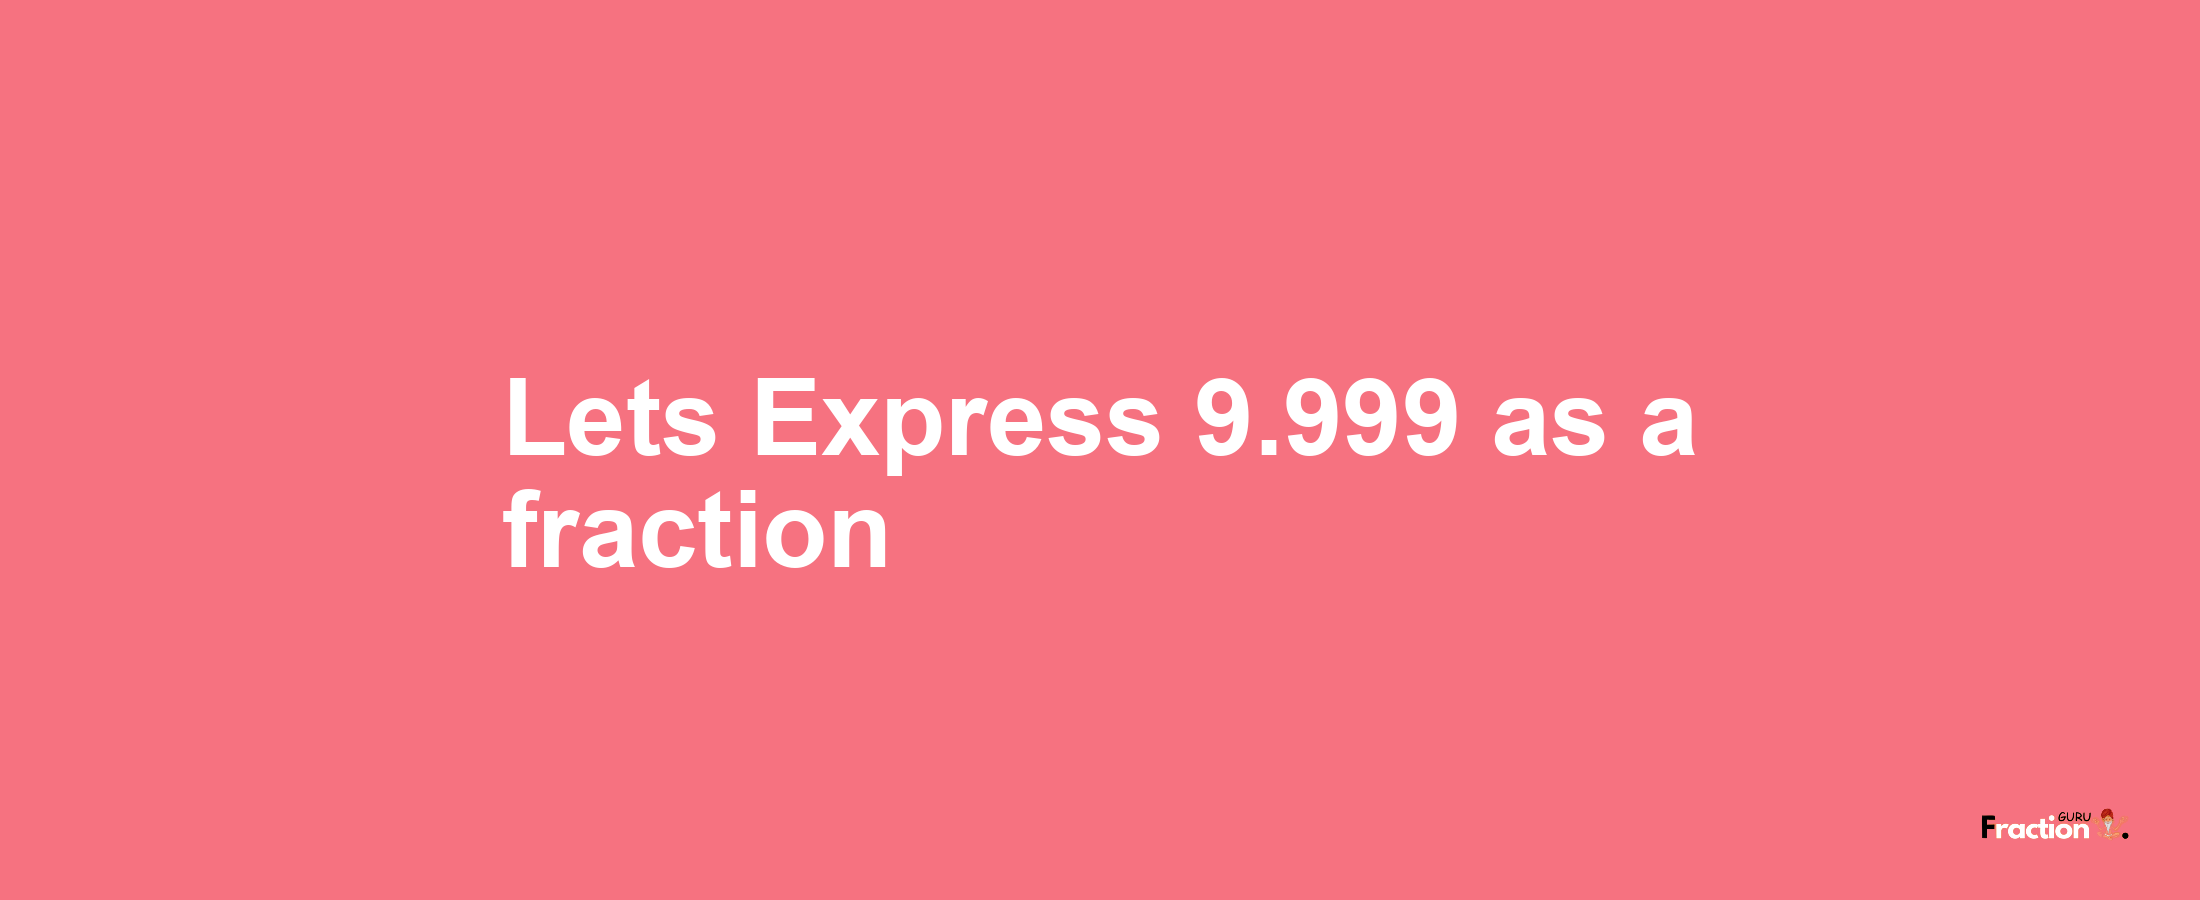 Lets Express 9.999 as afraction